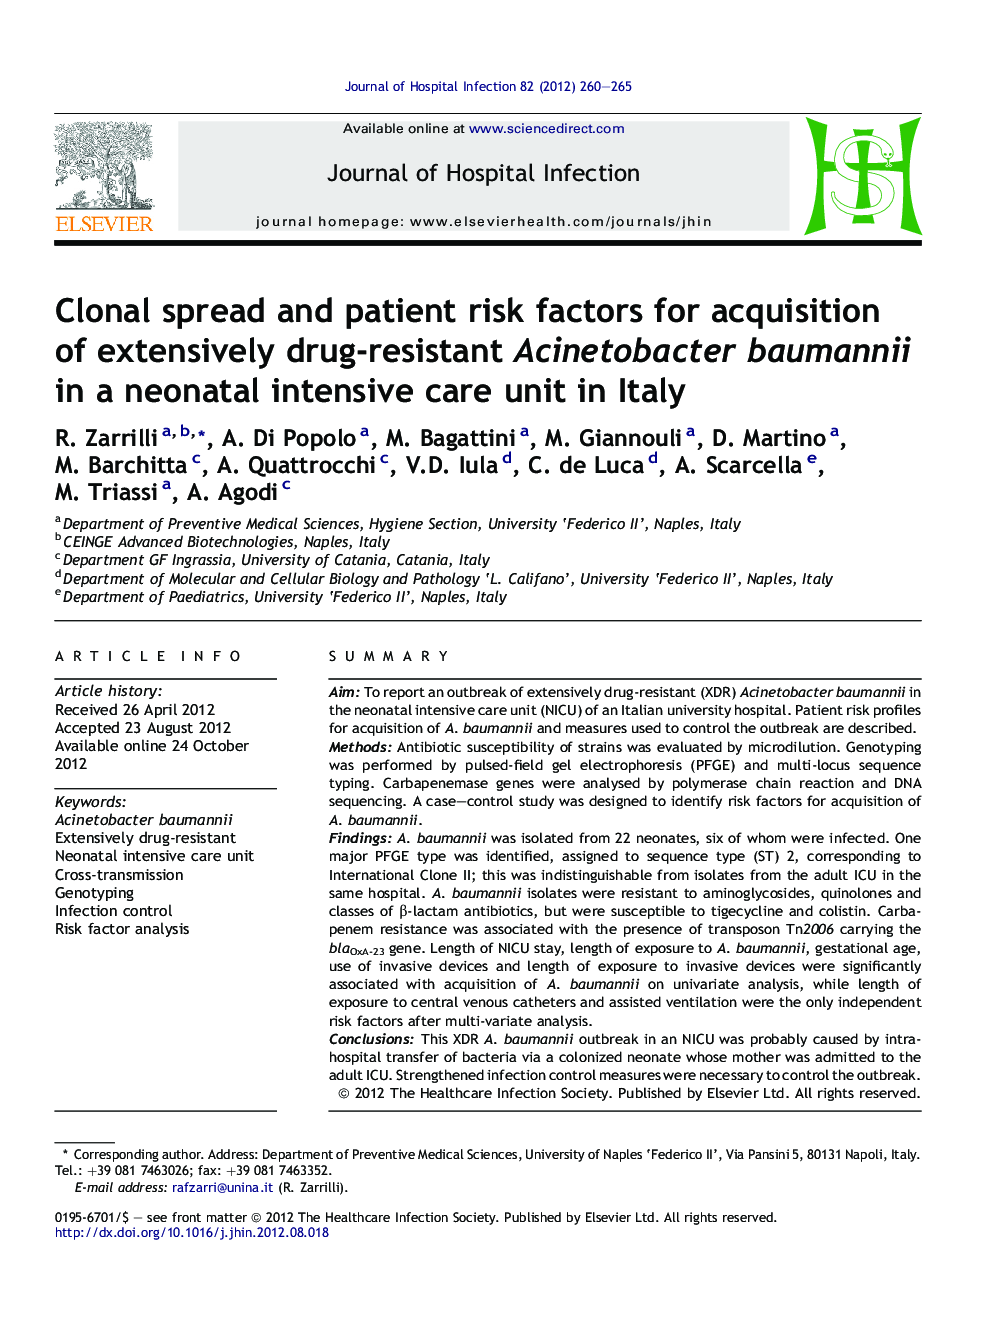 Clonal spread and patient risk factors for acquisition of extensively drug-resistant Acinetobacter baumannii in a neonatal intensive care unit in Italy